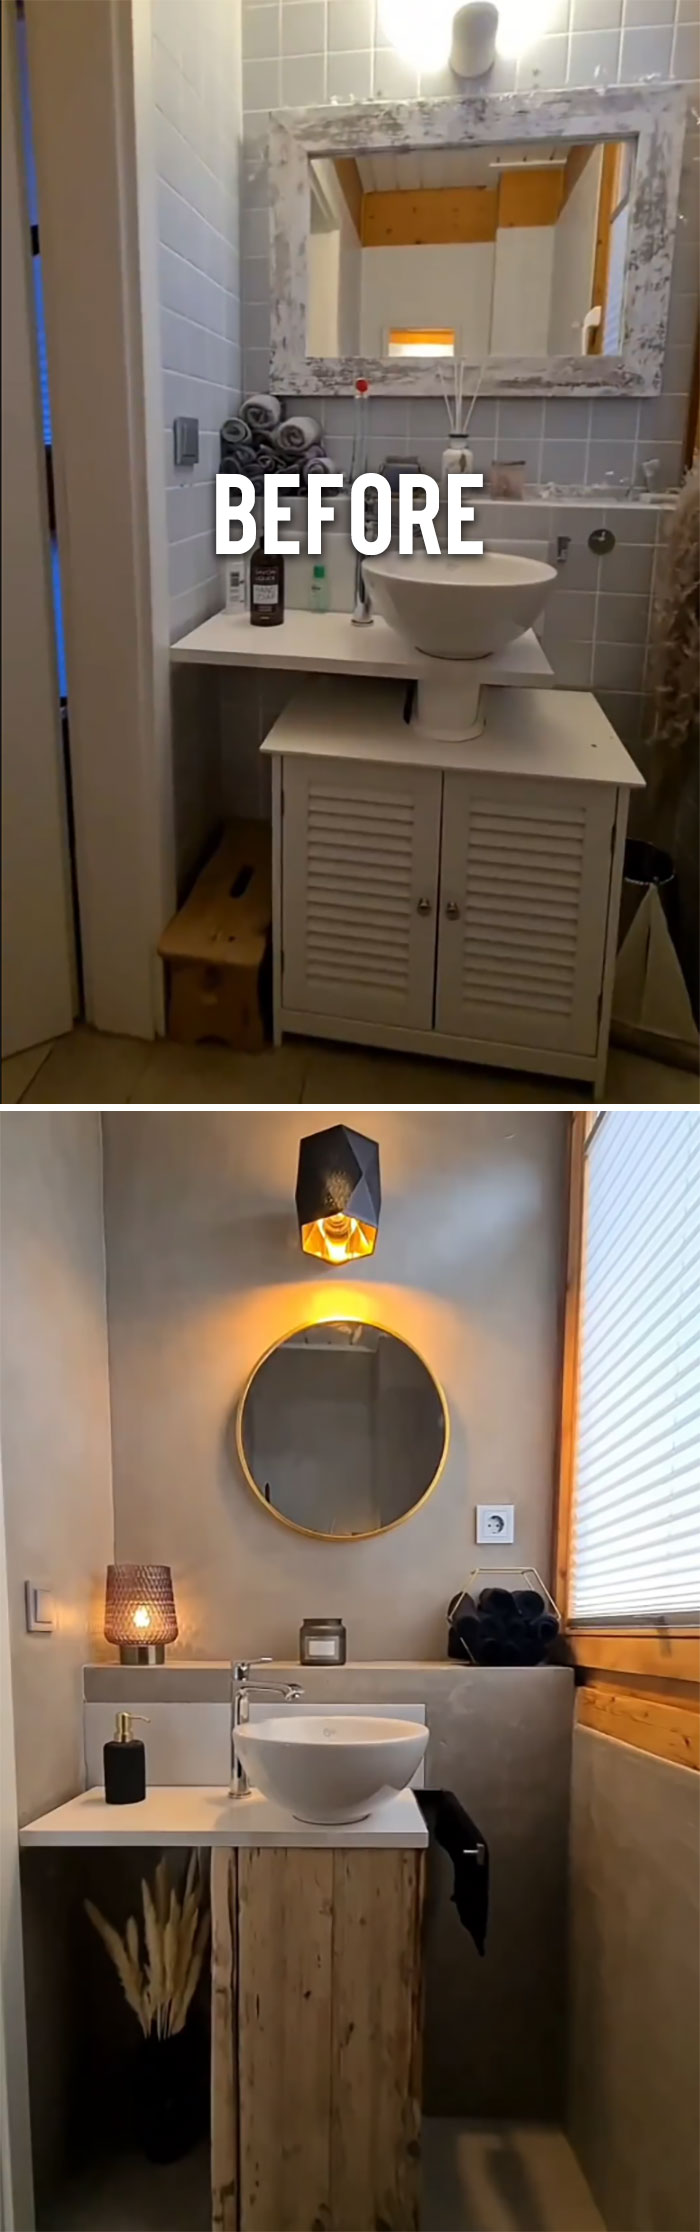 Bathroom Before And After! By @vizslacosmos